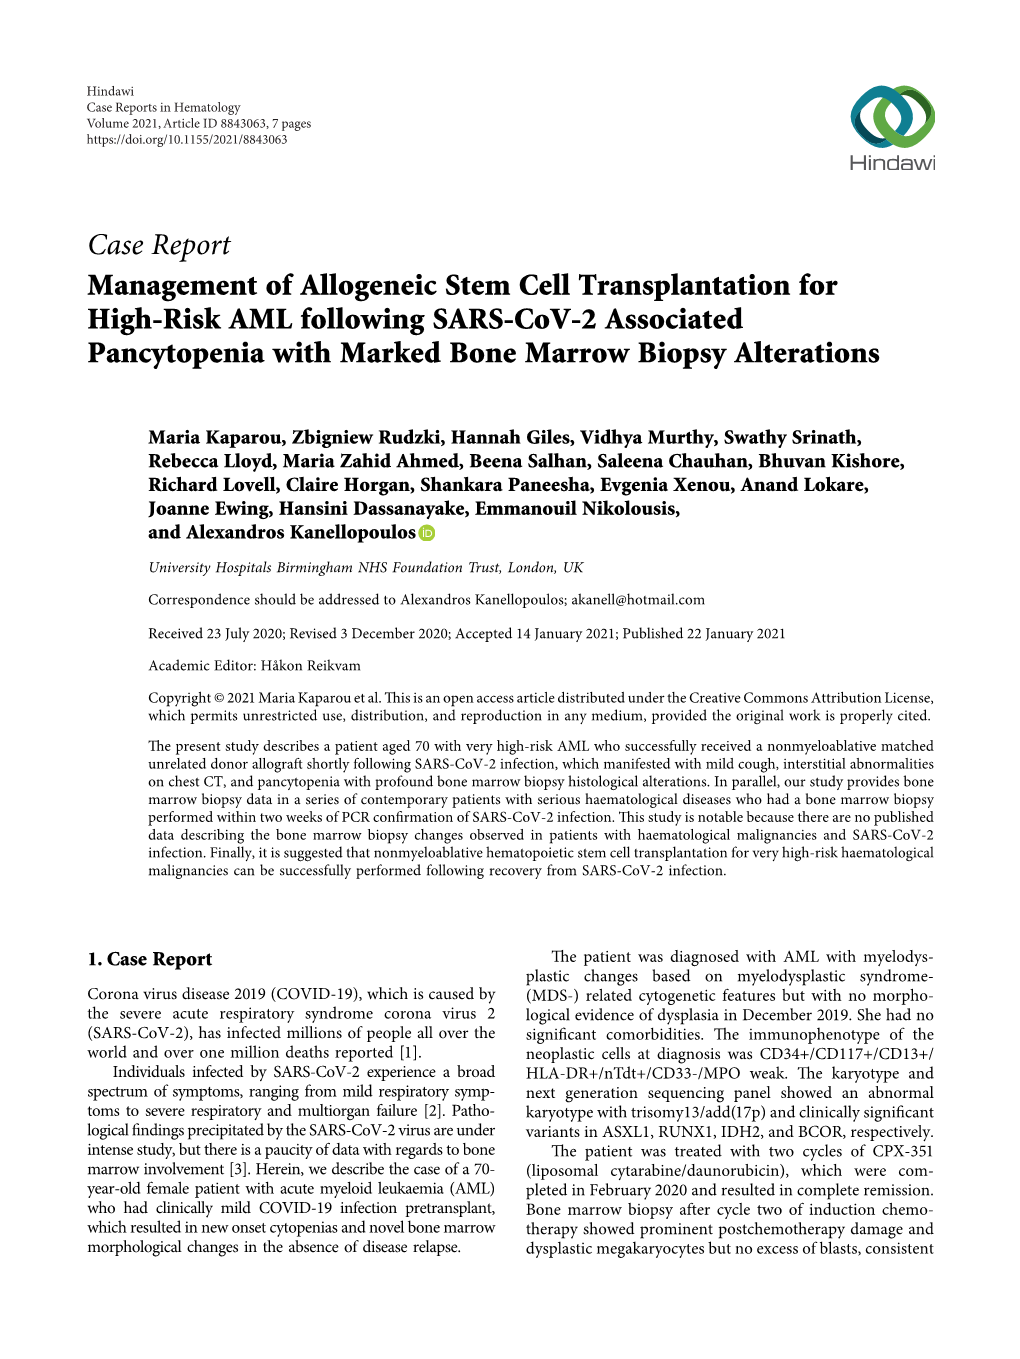 Management of Allogeneic Stem Cell Transplantation for High-Risk AML Following SARS-Cov-2 Associated Pancytopenia with Marked Bone Marrow Biopsy Alterations